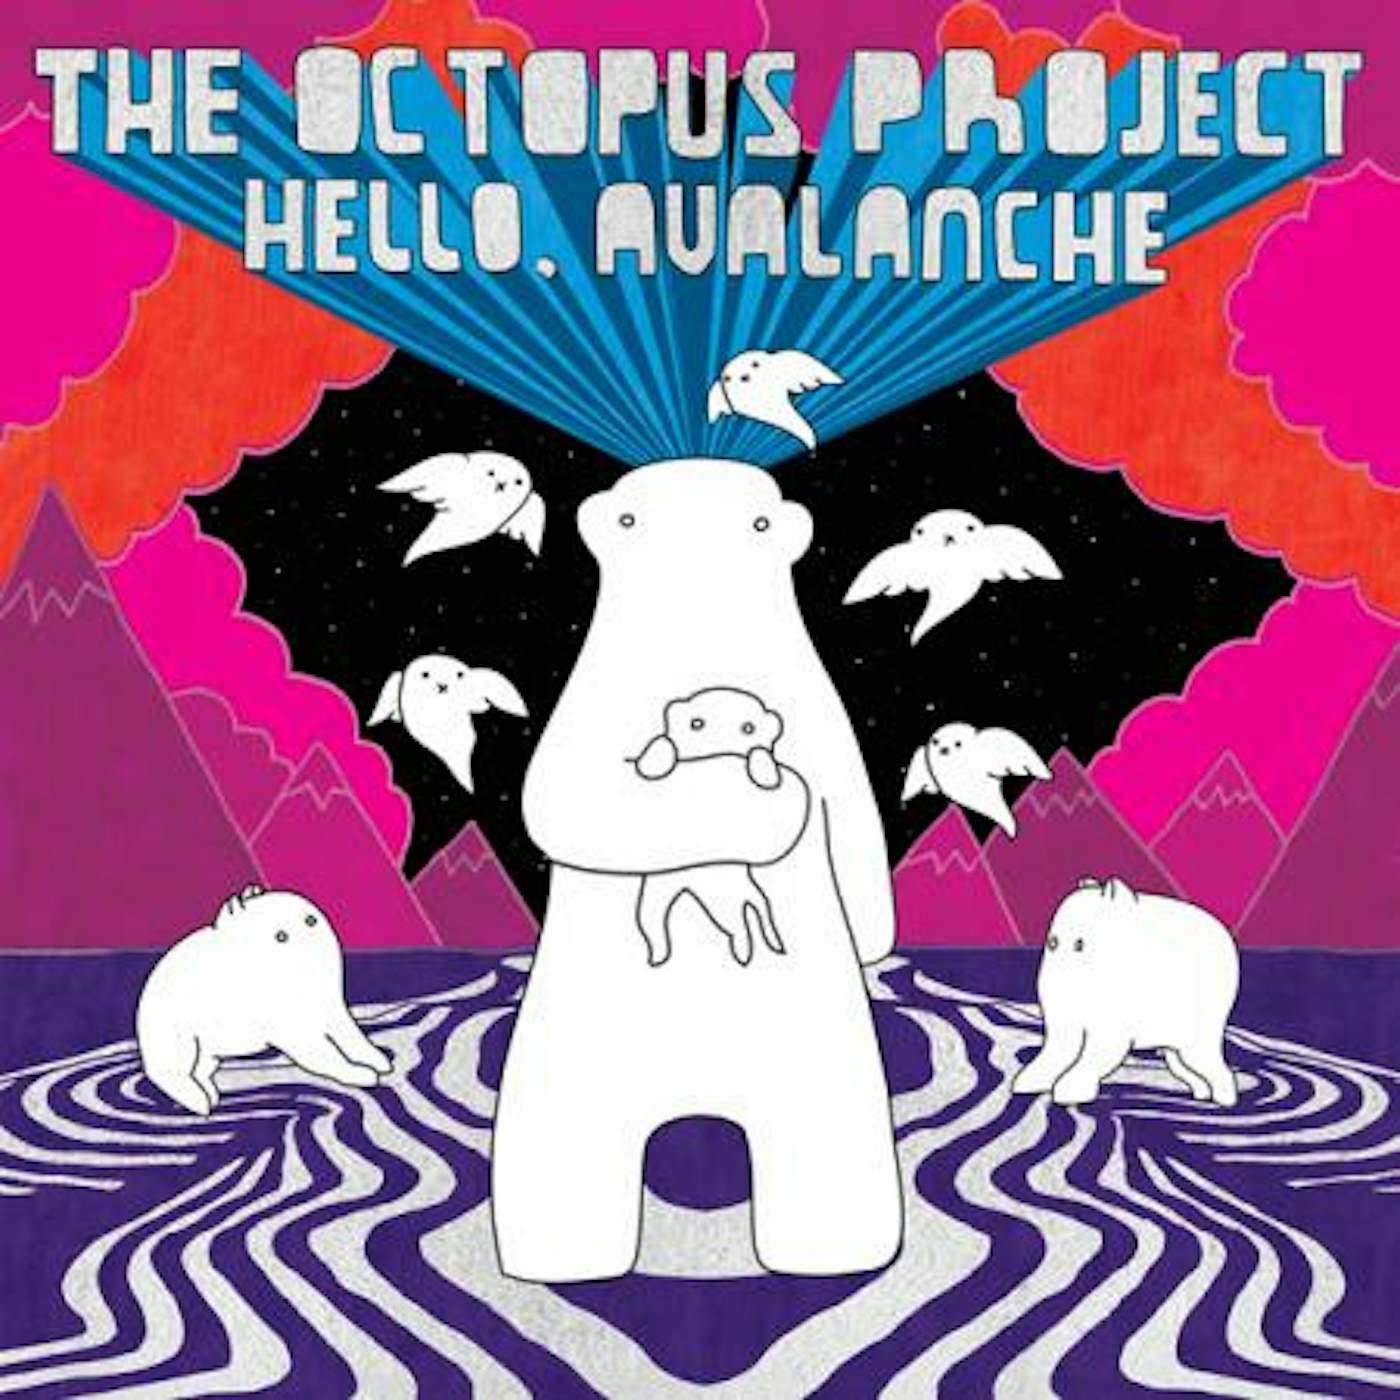 The Octopus Project HELLO AVALANCHE 11TH ANNIVERSARY DELUXE EDITION Vinyl Record